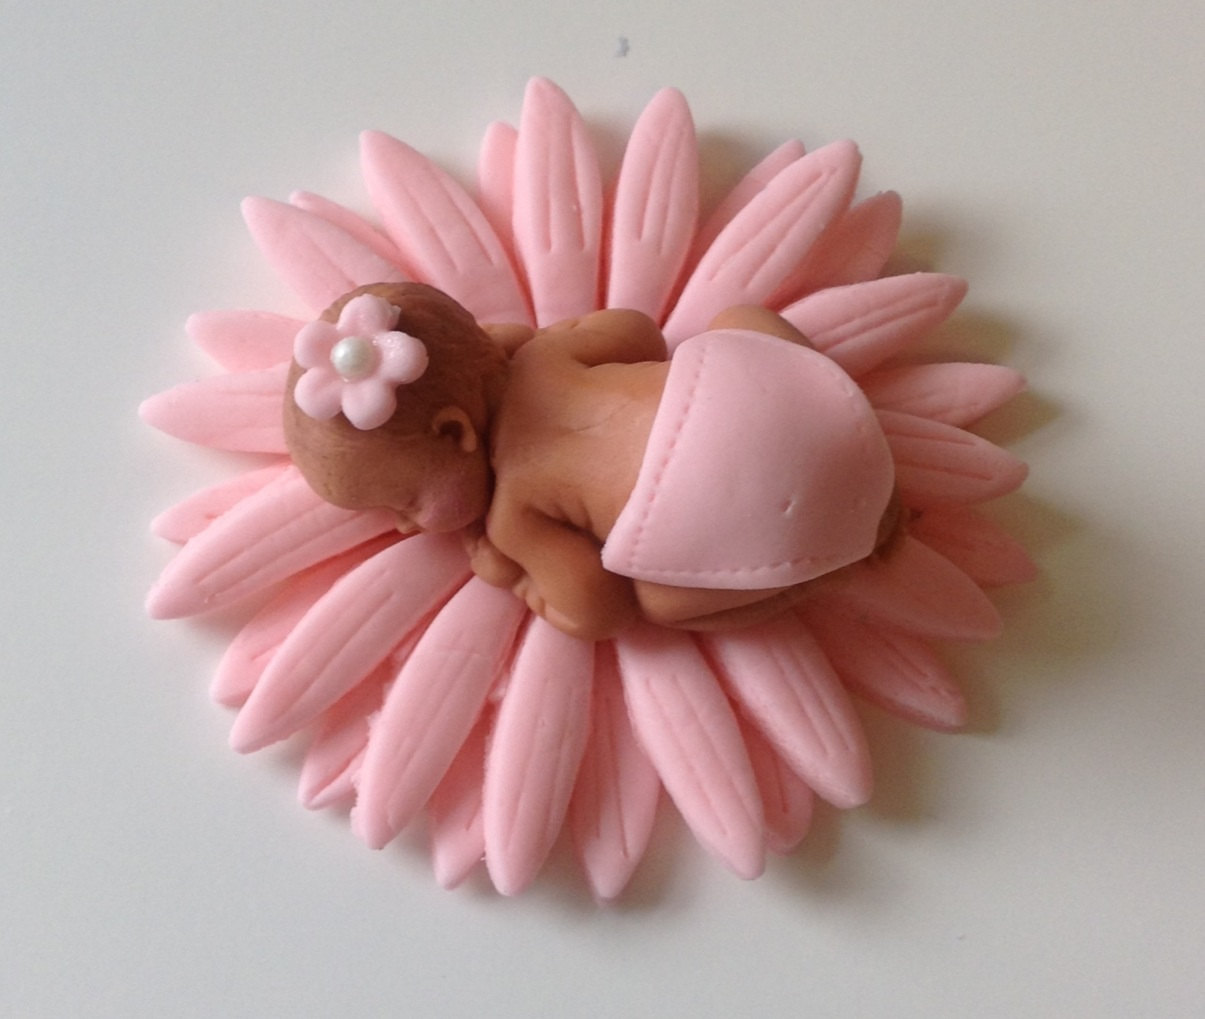 Baby Shower Cake Topper Fondant Pink Daisy Baby Girl Flower Daisy Cake Topper Fondant Cake Topper Baby Nursery Flower Floral Daisy Simple